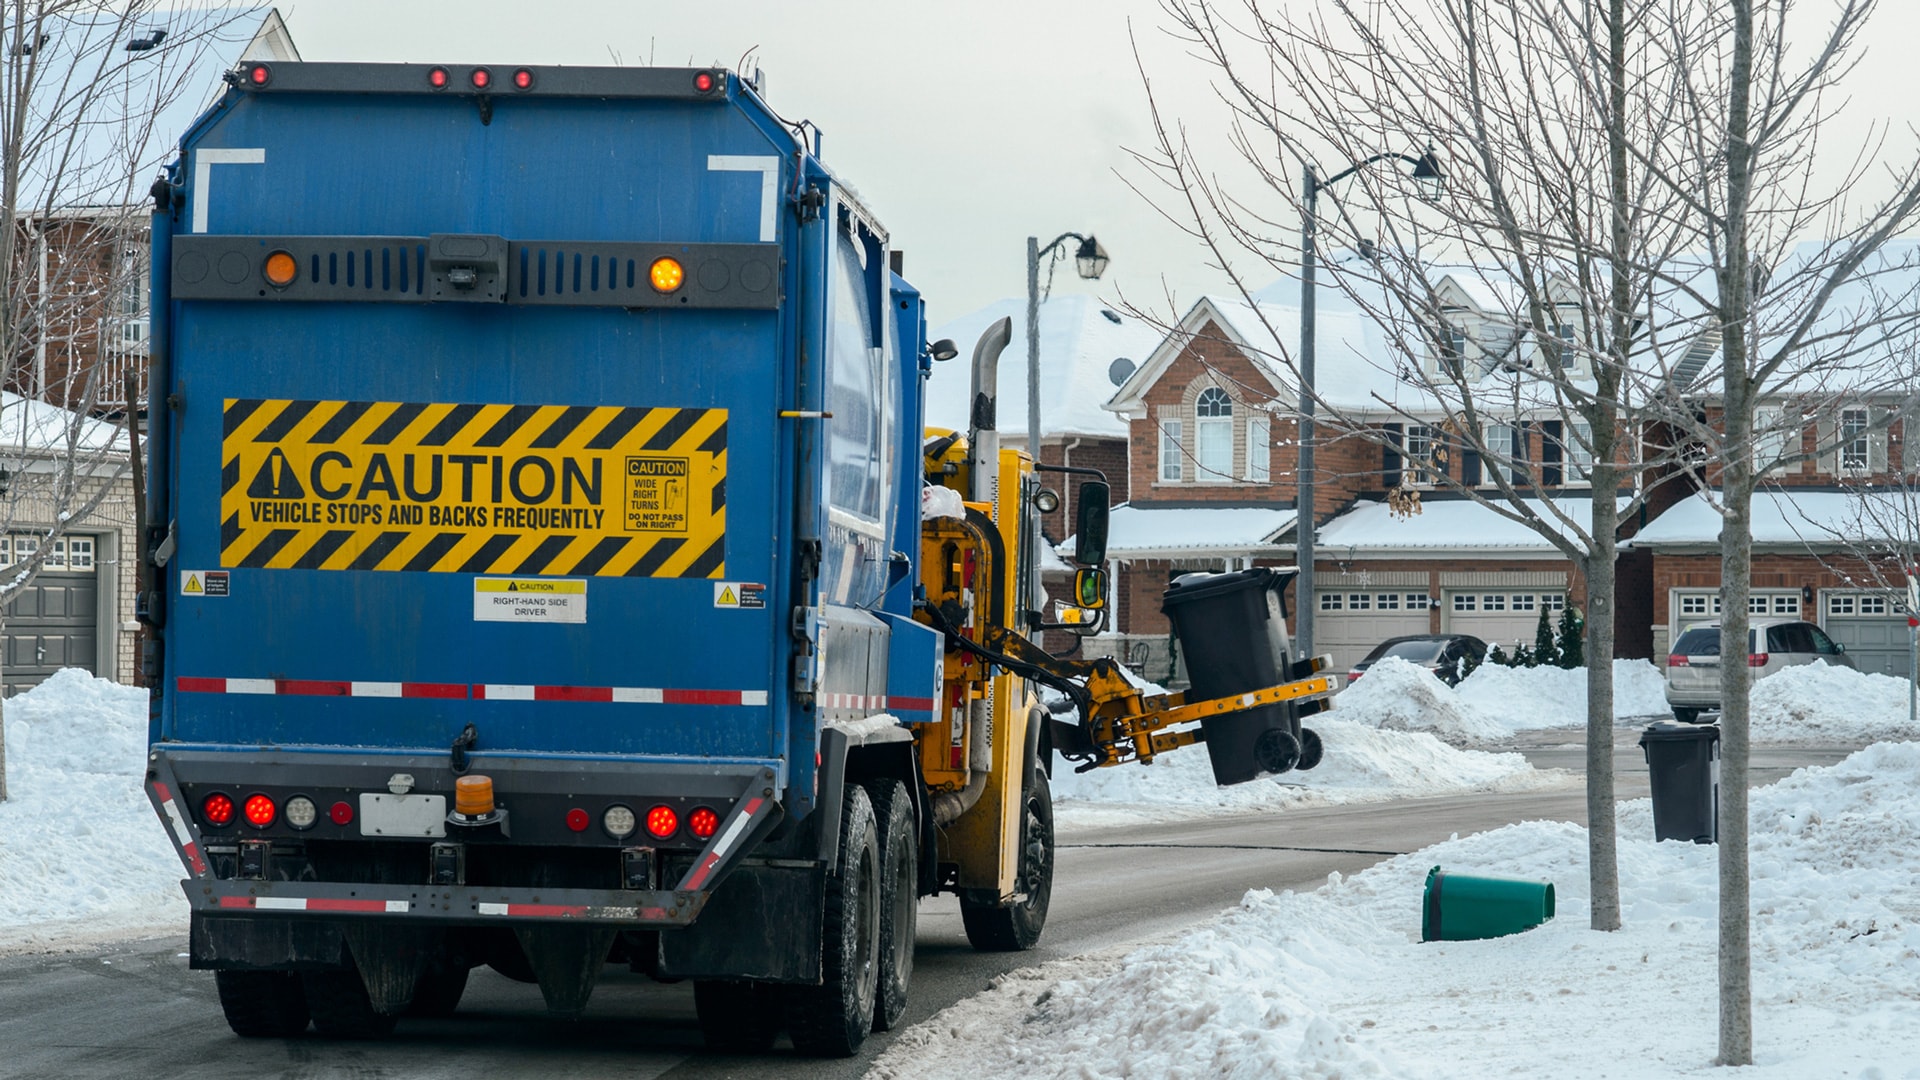 StreetEagle’s waste fleet management solutions offers extra layers of field visibility